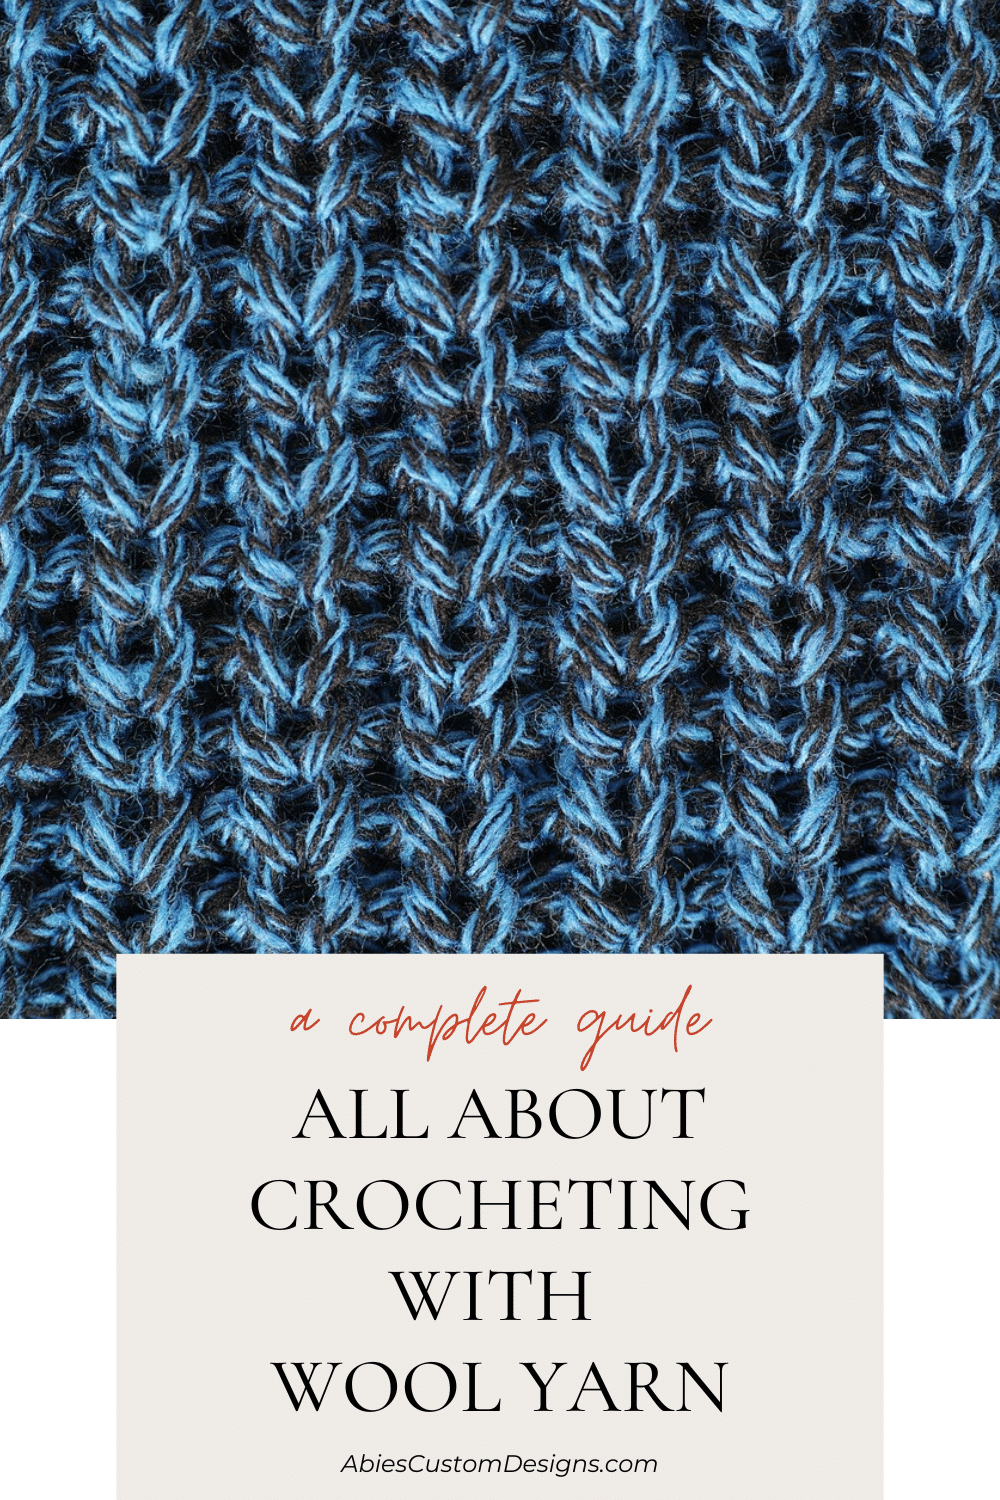 All about crocheting with wool yarn